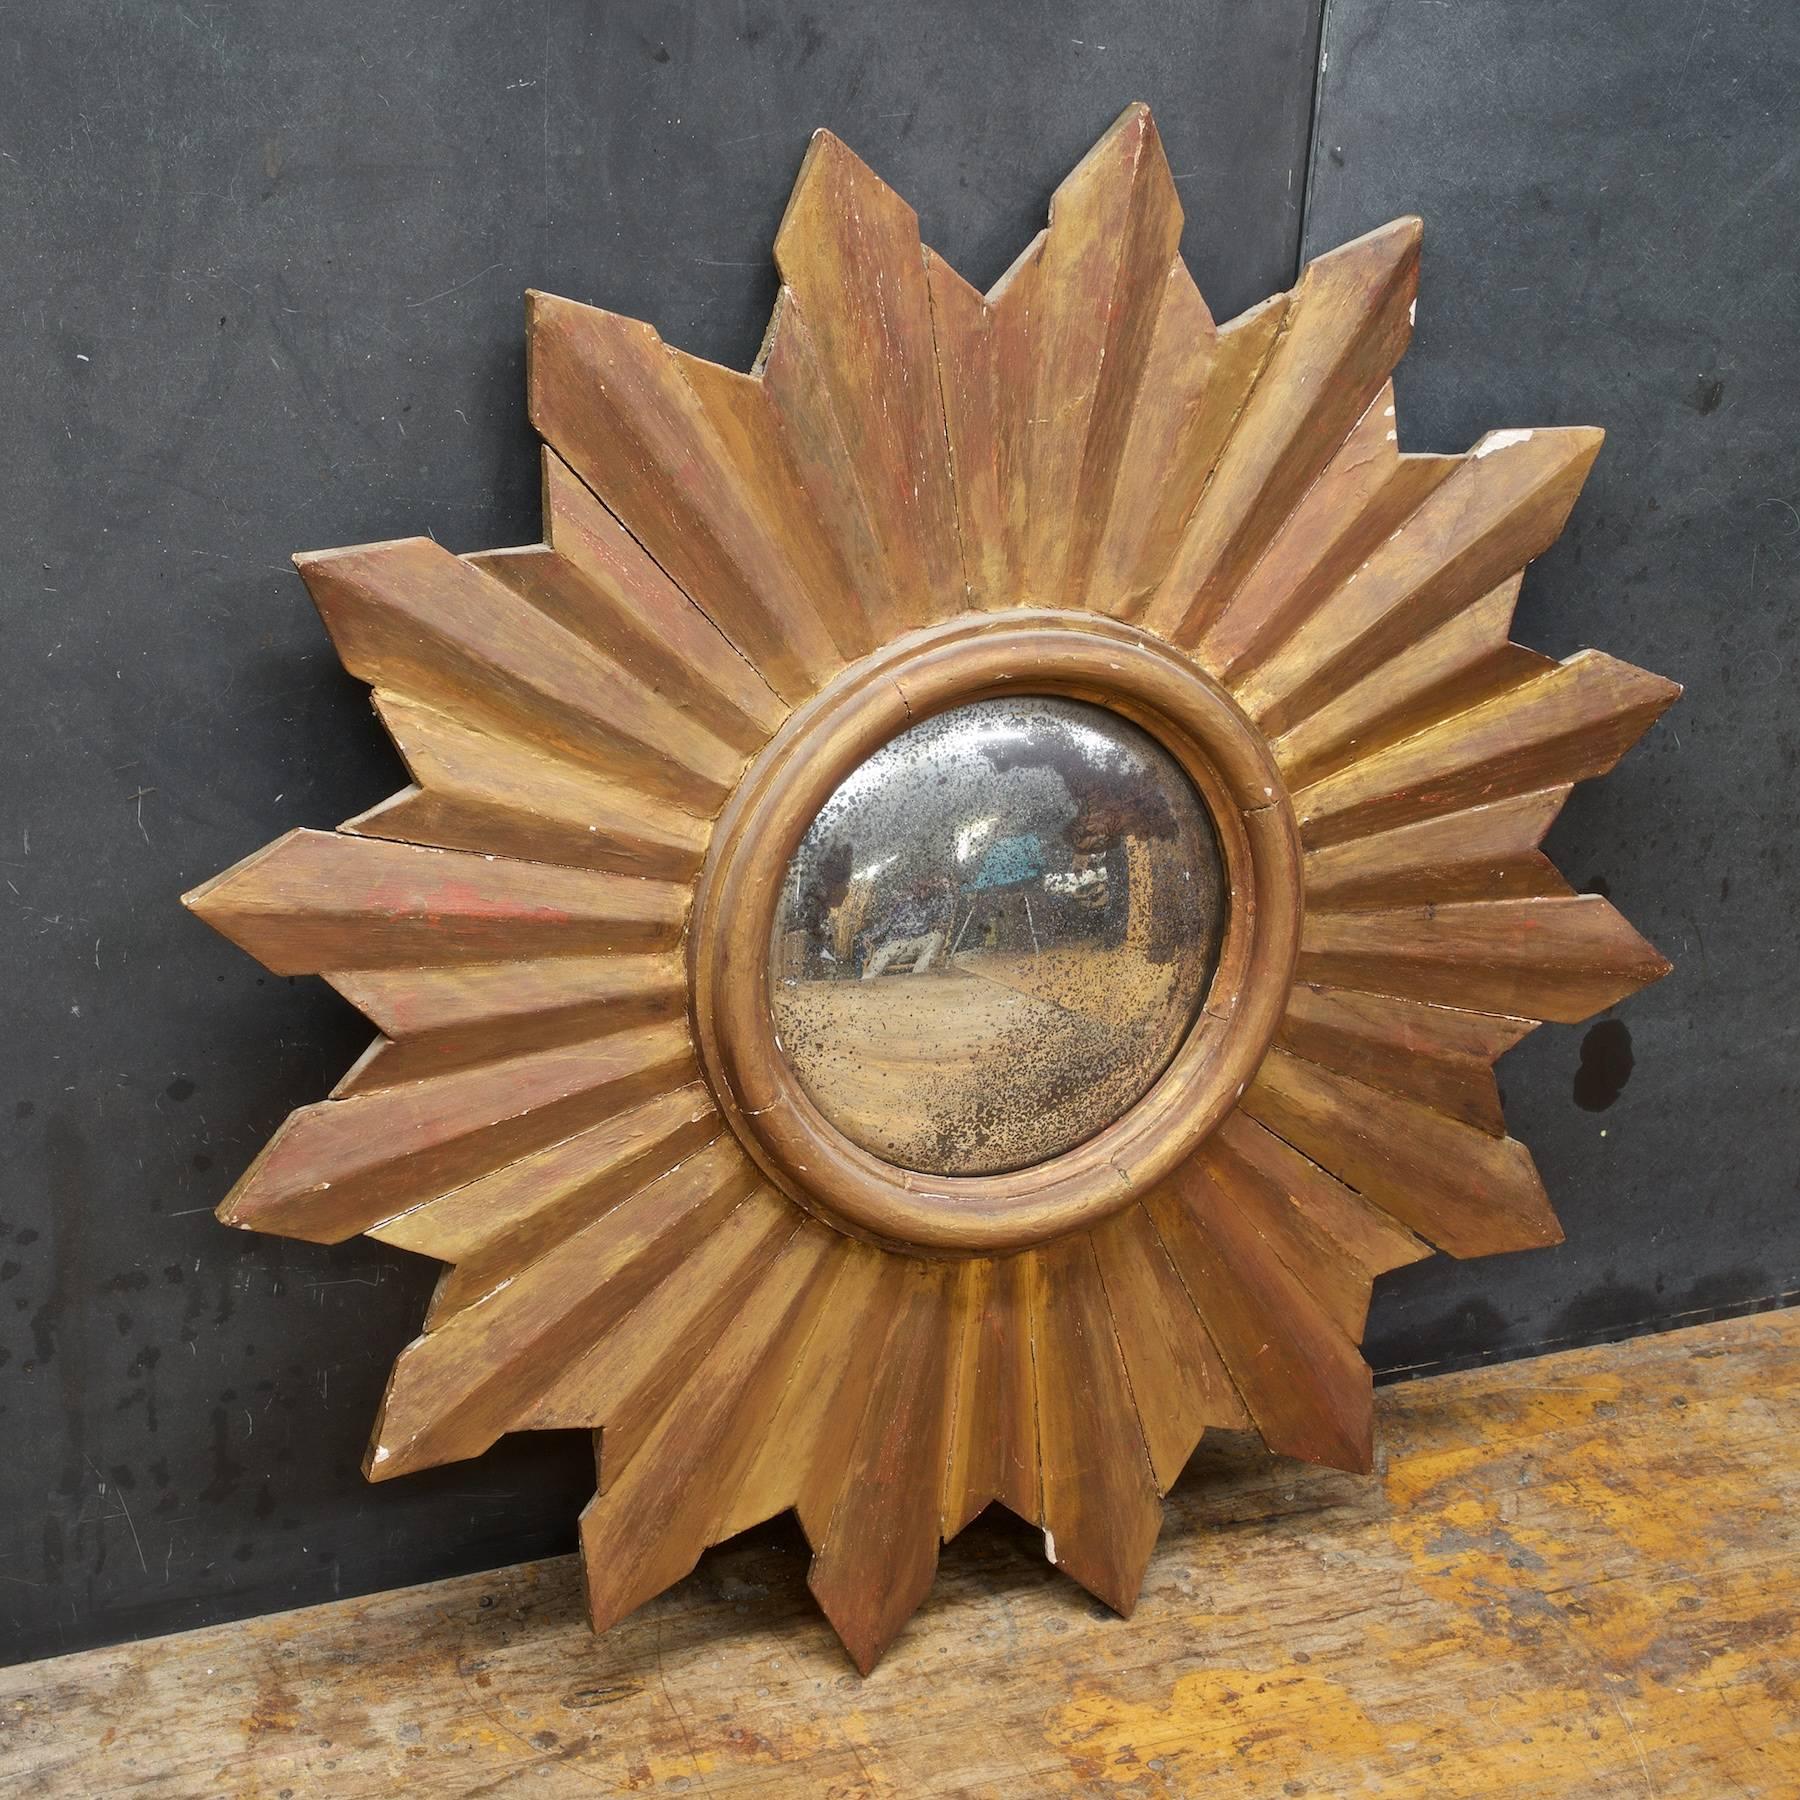 Rather large at almost 3 feet in diameter. A heavily Patinated and worn wall mirror, ready to hang, Revival design probably made in the midcentury era.
    